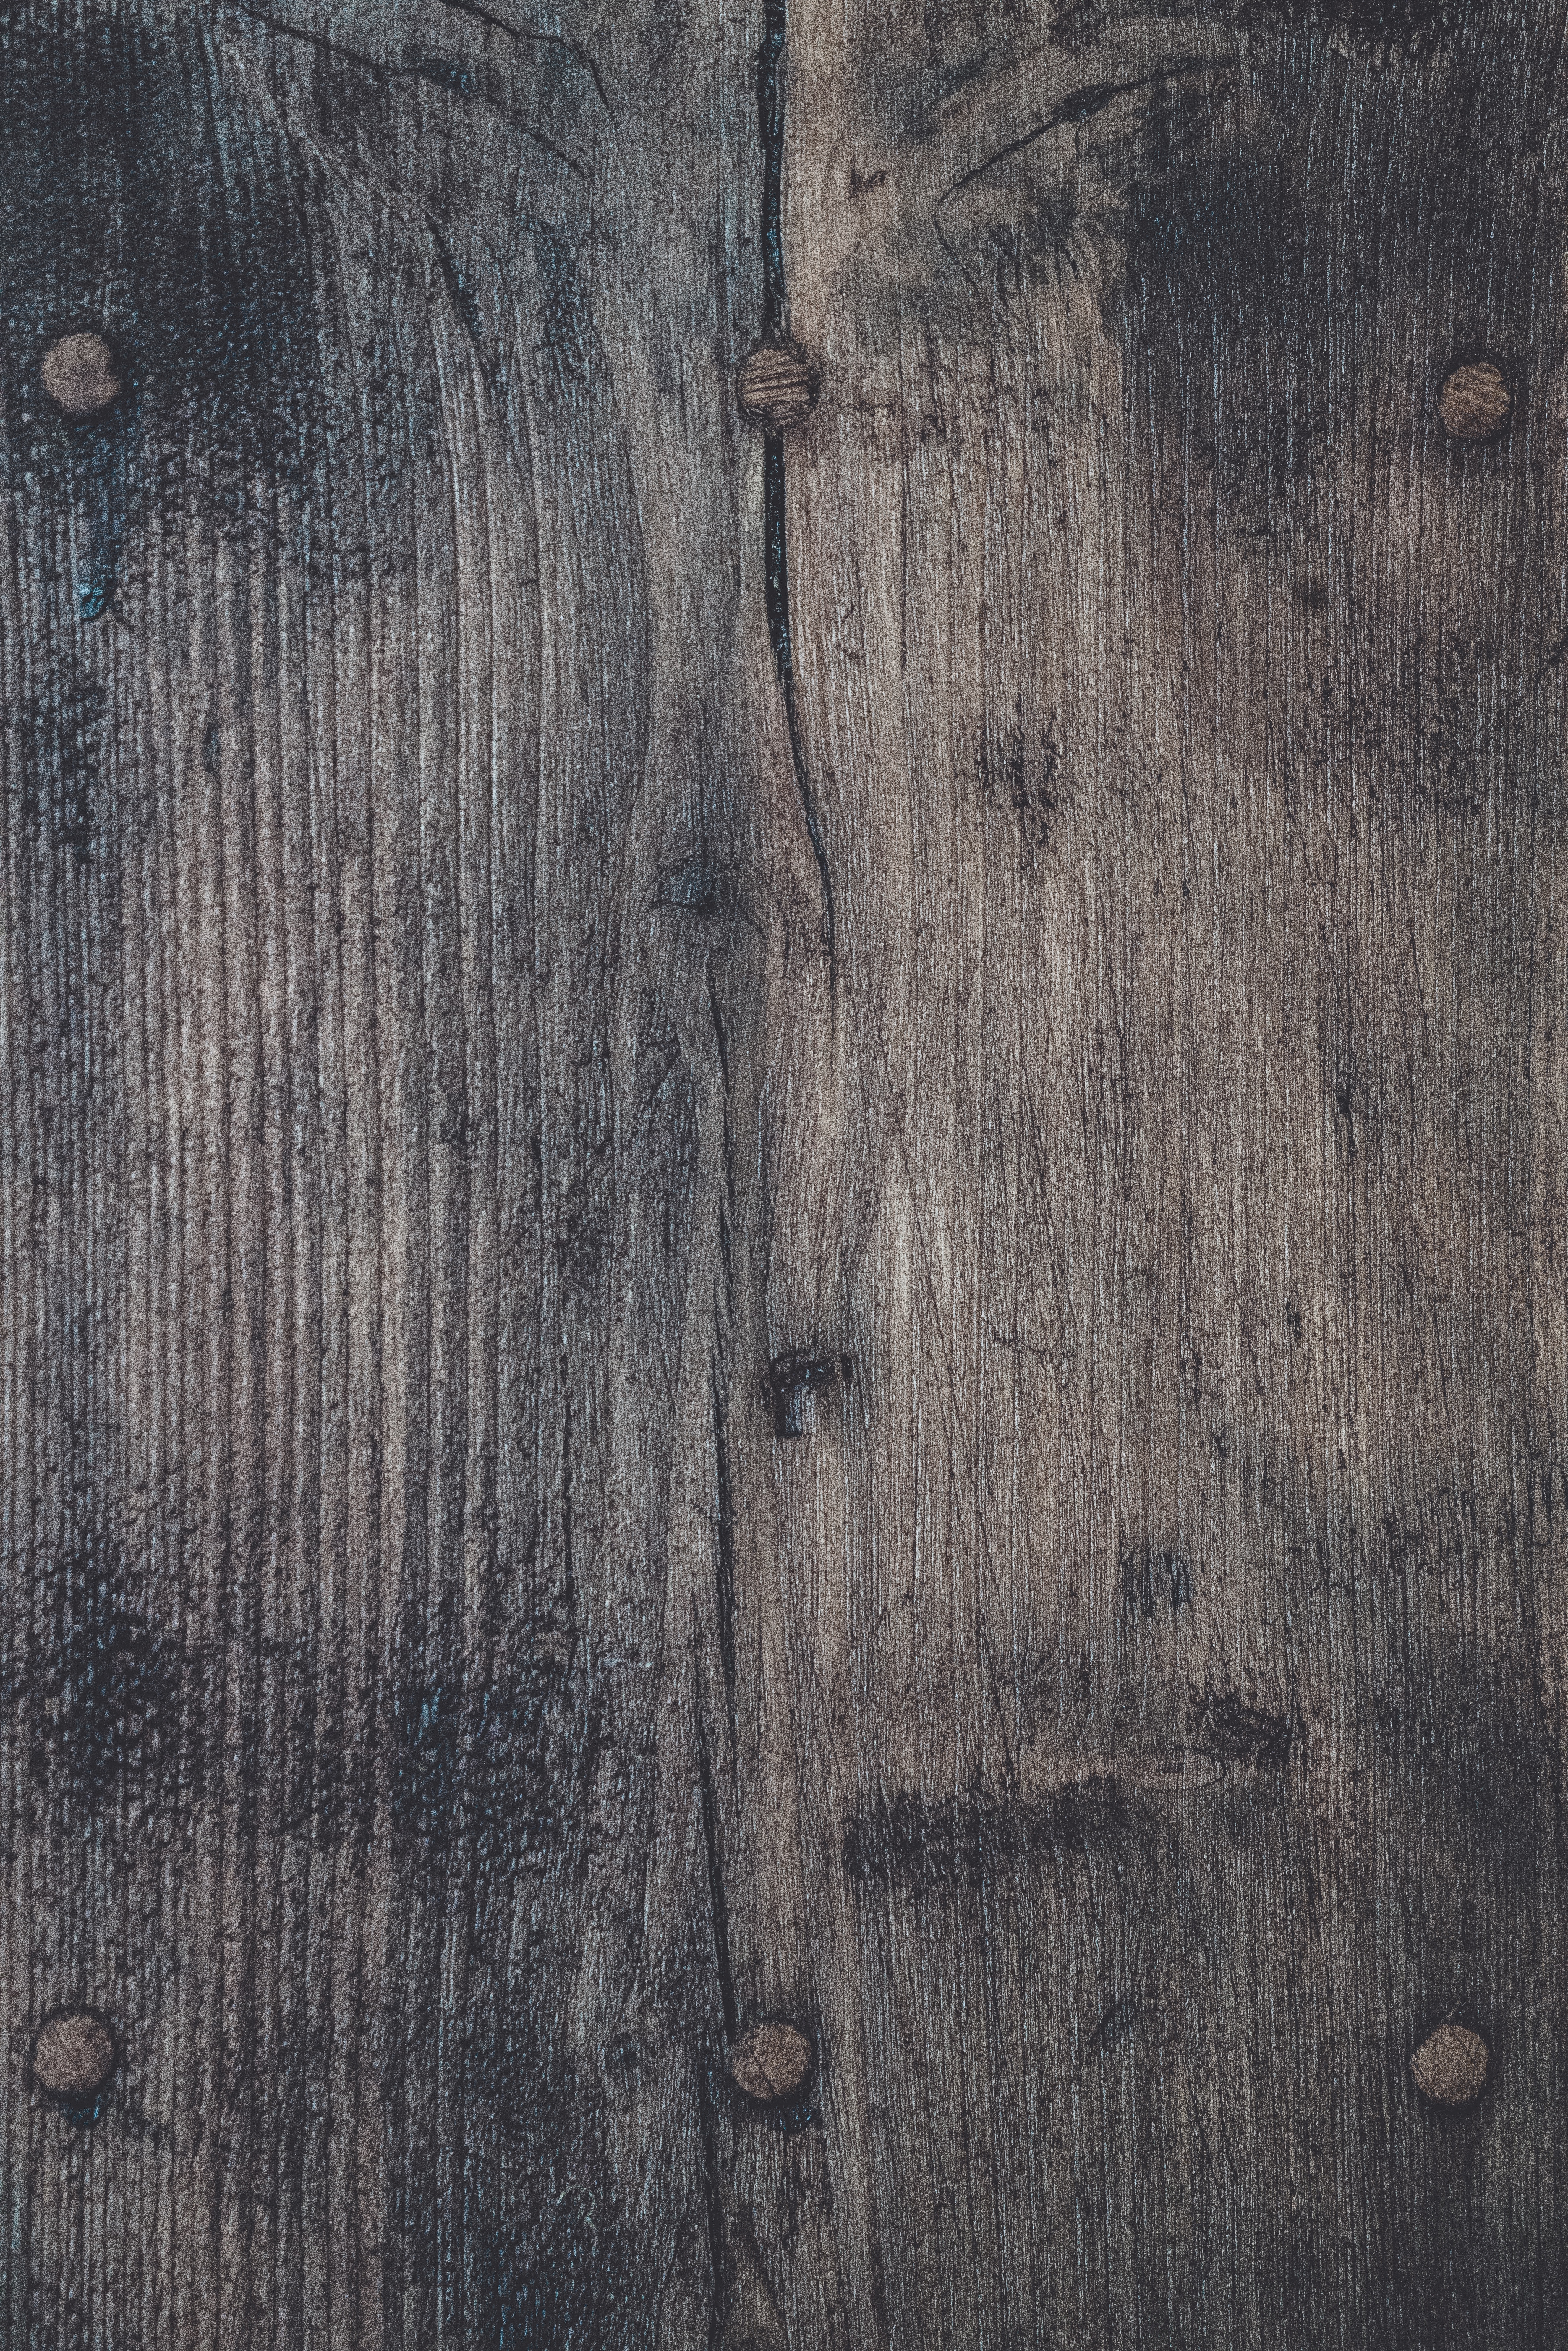 texture, ribbed, textures, surface, wood, wooden High Definition image